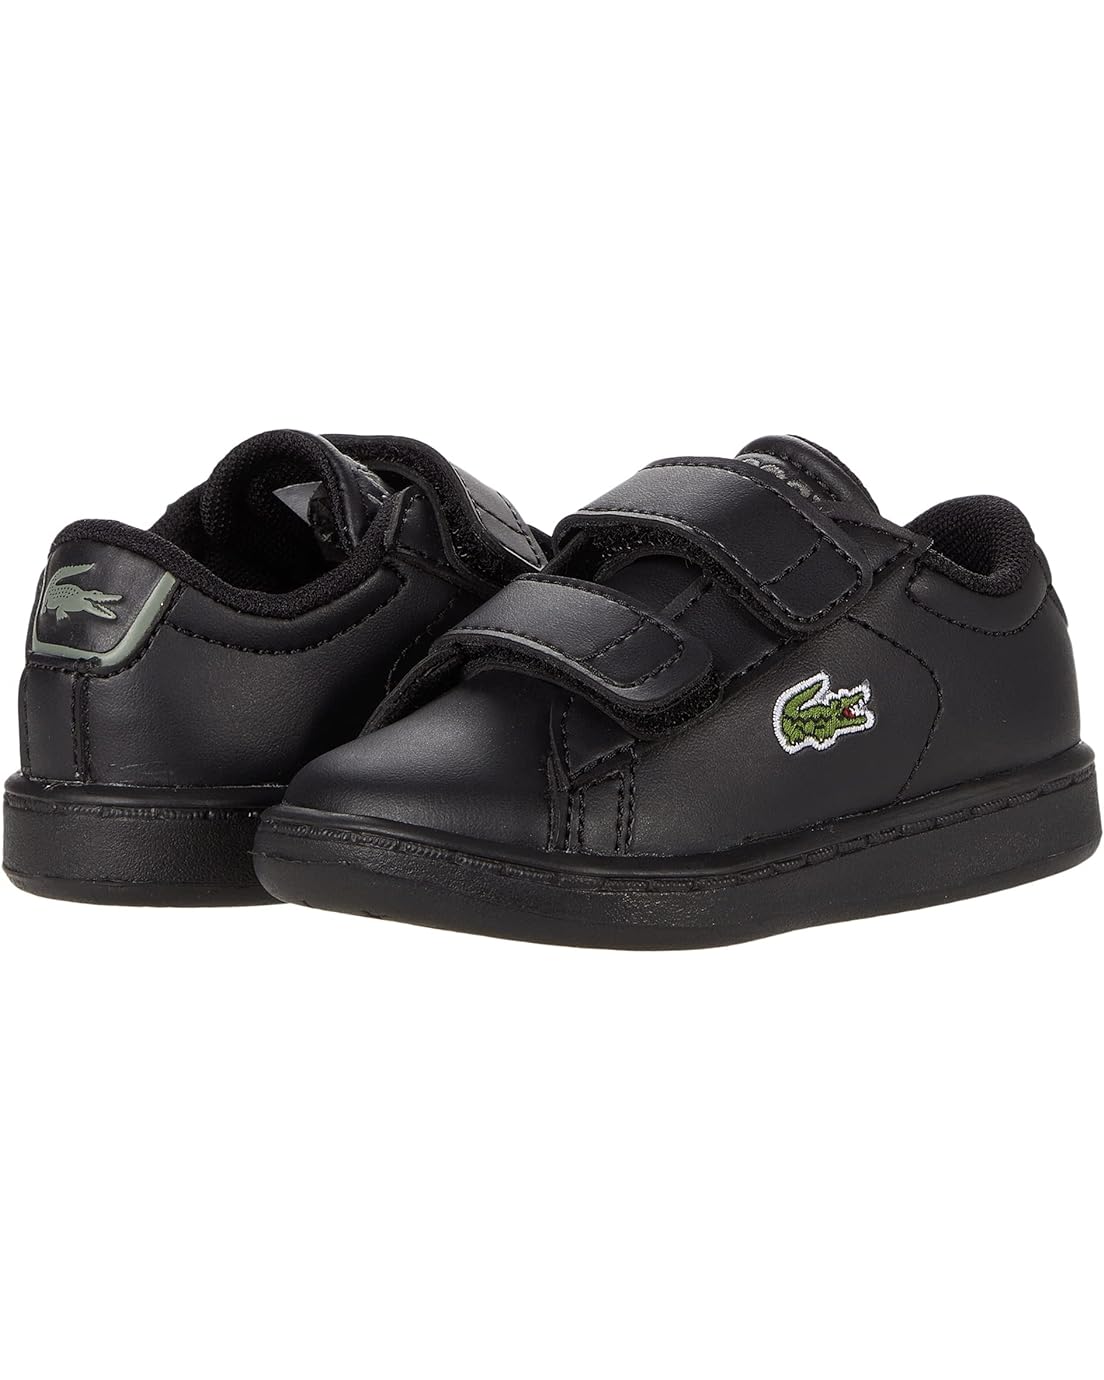 Lacoste Kids Carnaby Evo Bl 21 1 SUI (Toddler/Little Kid)